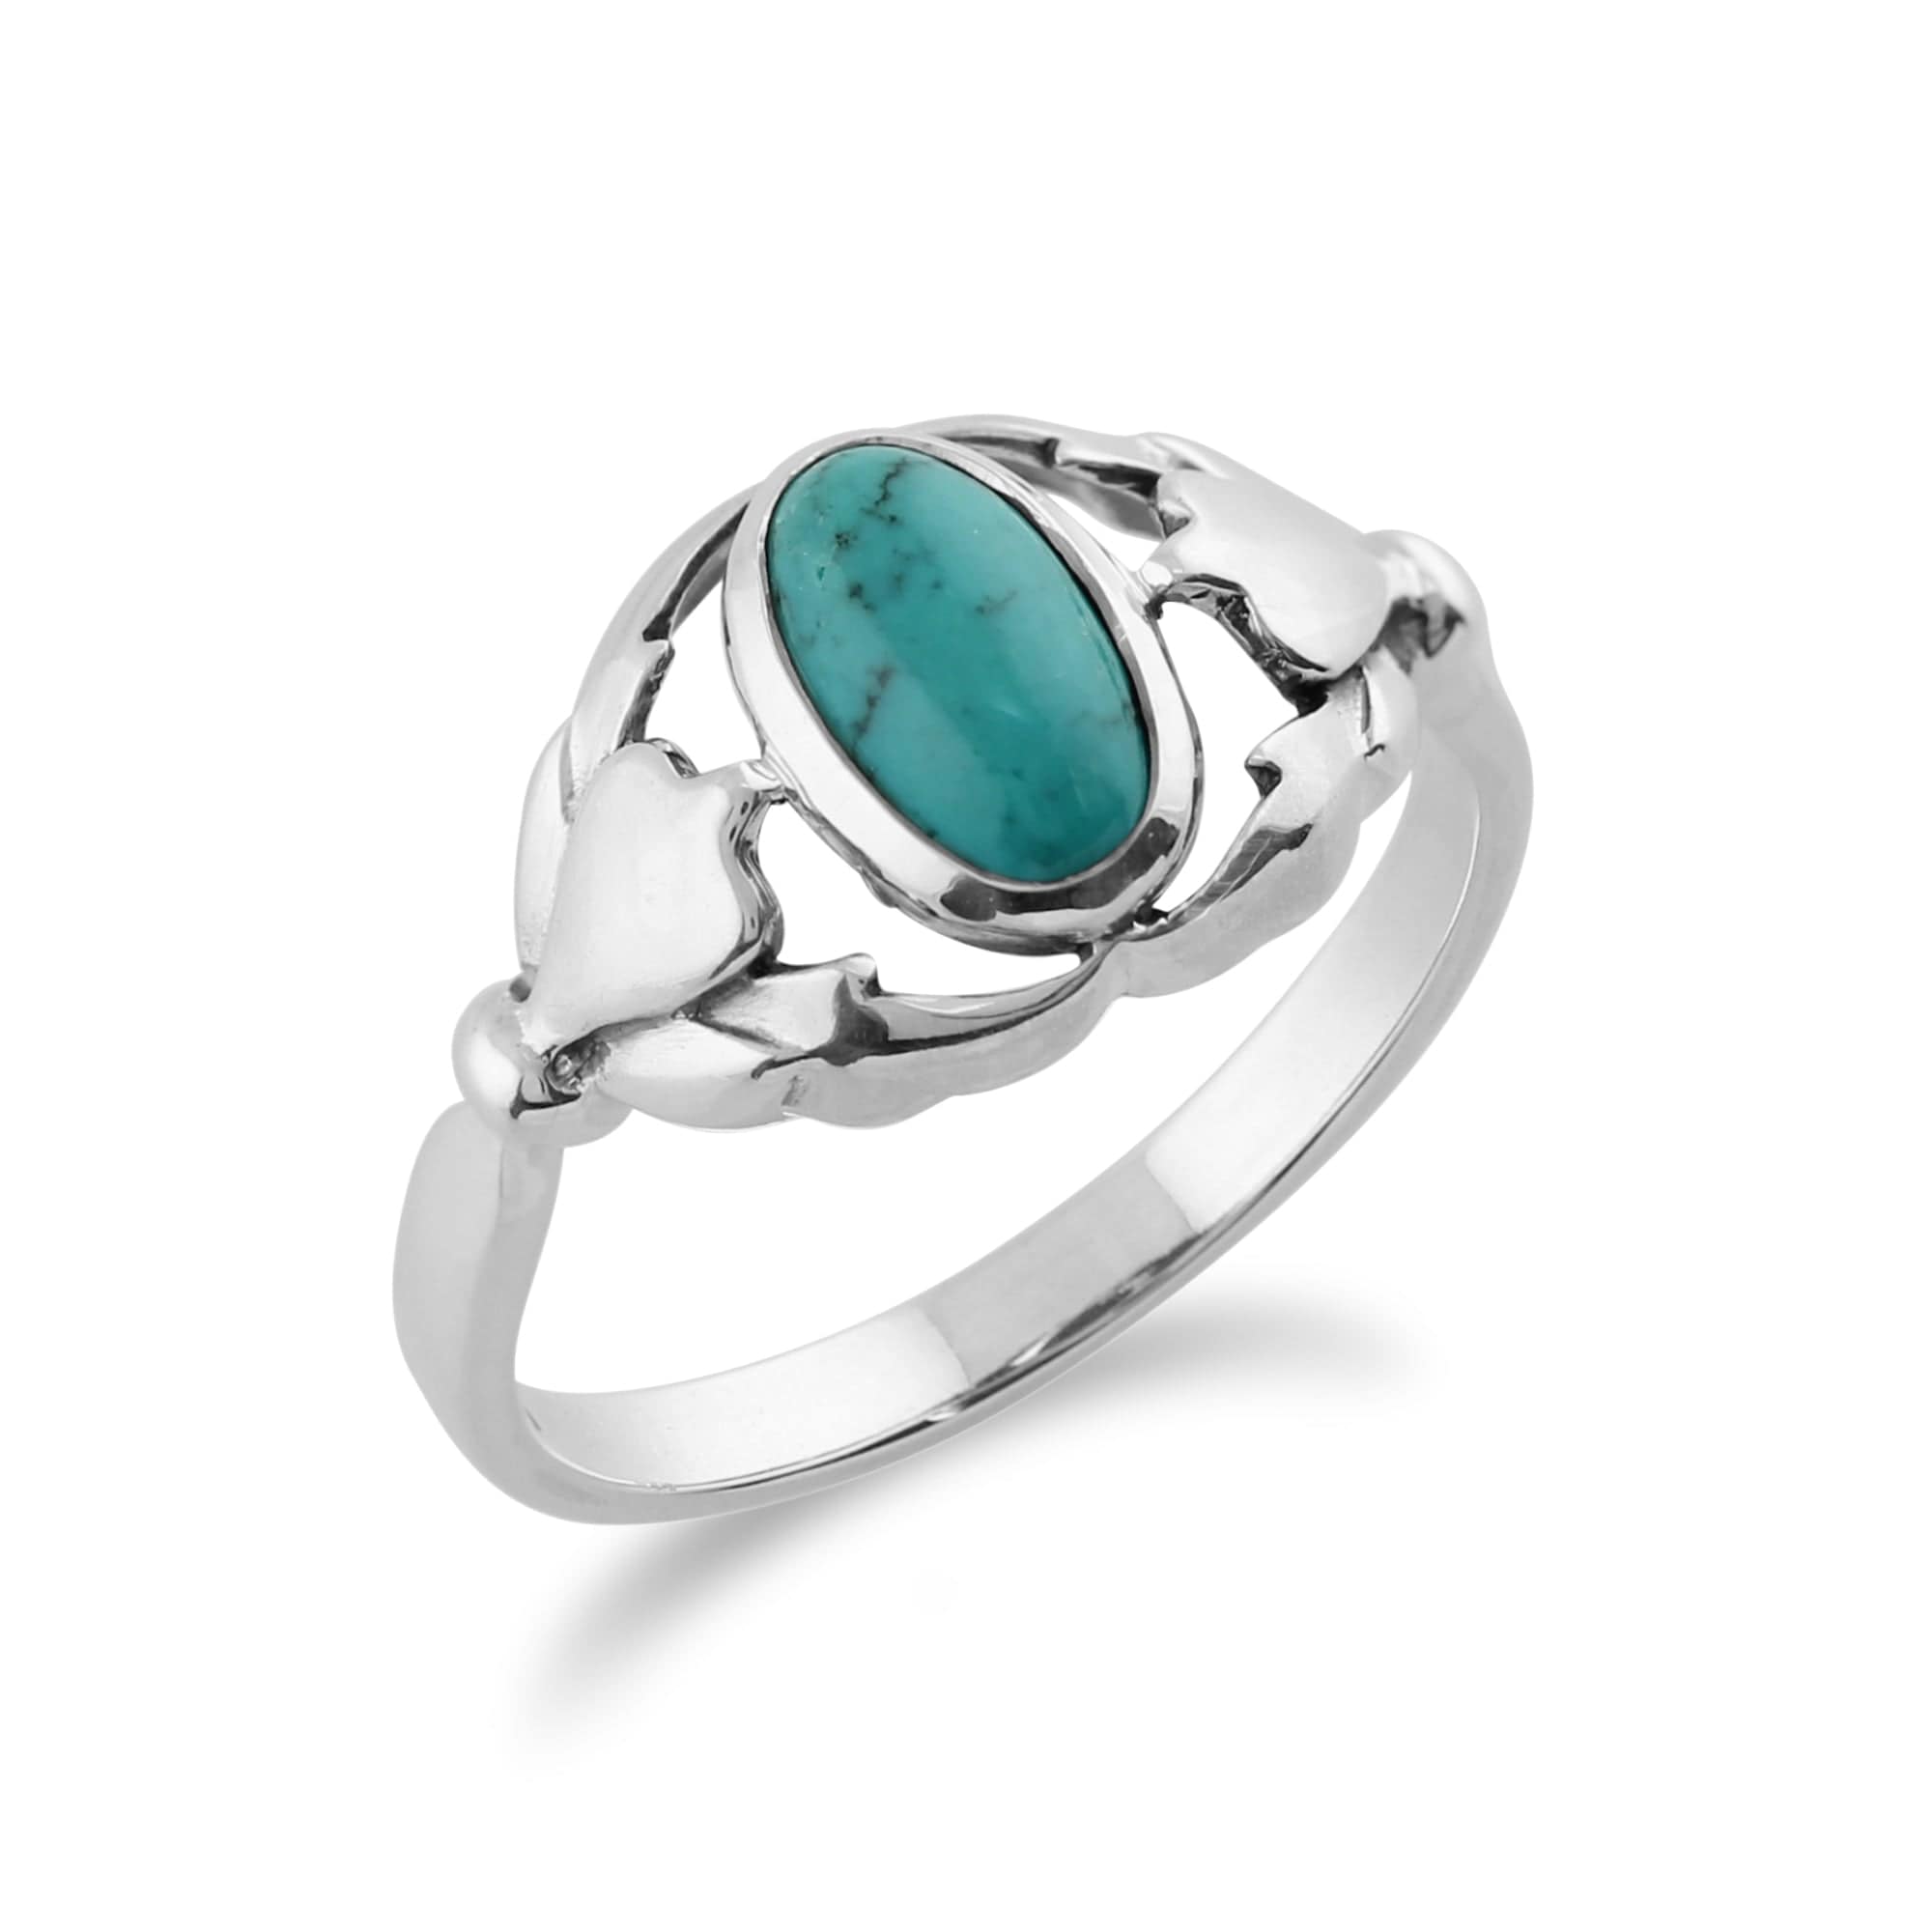 Gemondo 925 Sterling Silver 0.77ct Turquoise Ring Image 2